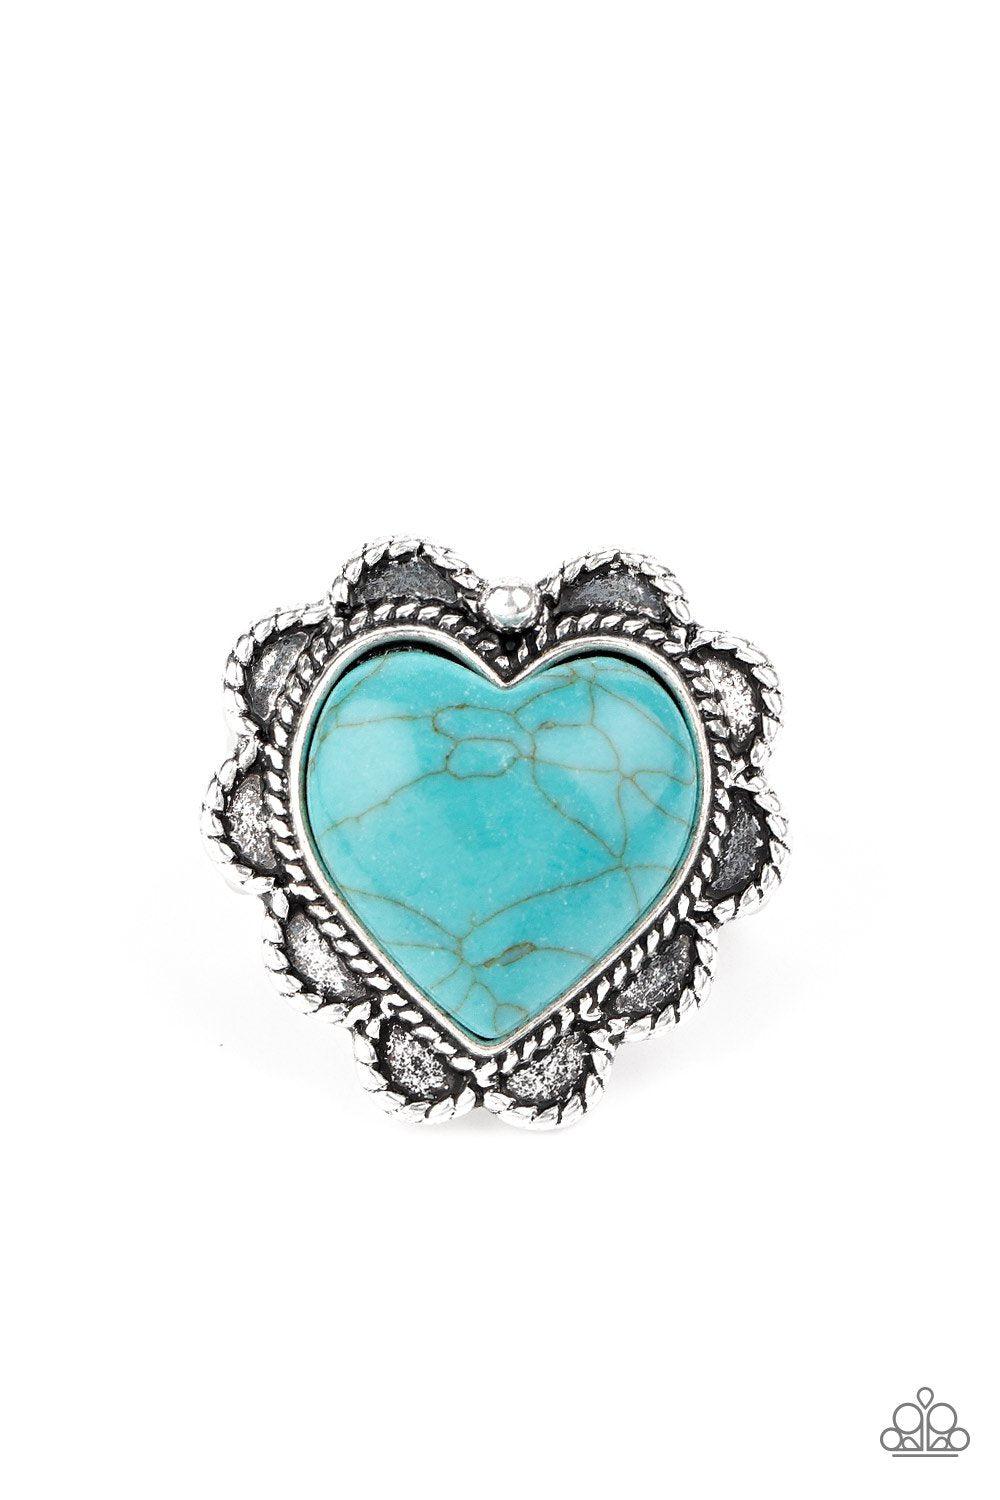 Desert Desire Turquoise Blue Stone Heart Ring - Paparazzi Accessories - lightbox -CarasShop.com - $5 Jewelry by Cara Jewels